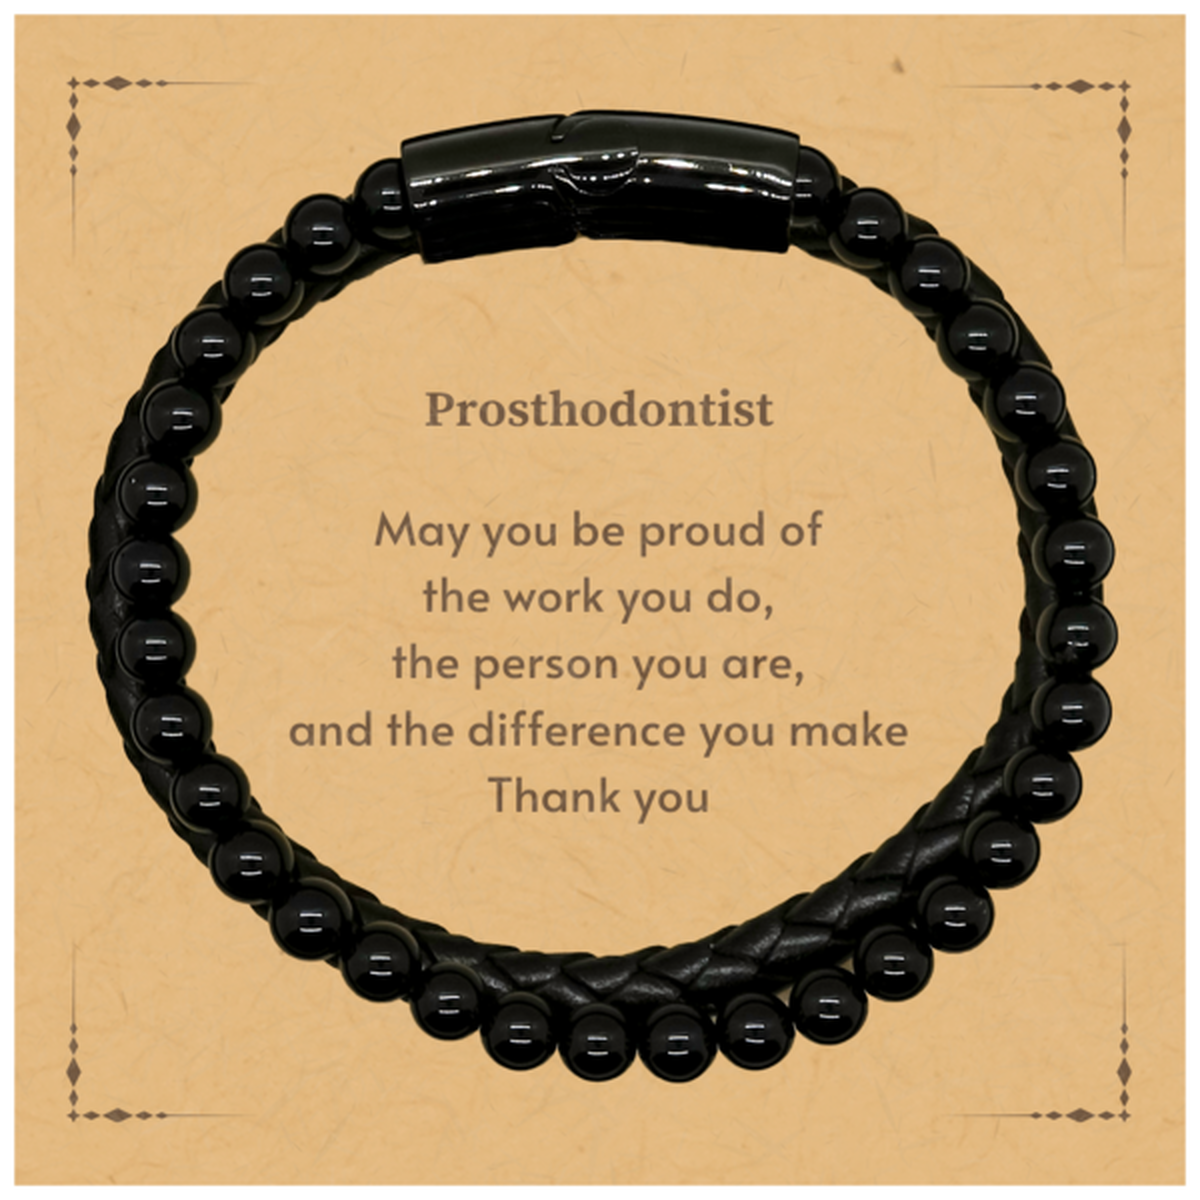 Heartwarming Stone Leather Bracelets Retirement Coworkers Gifts for Prosthodontist, Prosthodontist May You be proud of the work you do, the person you are Gifts for Boss Men Women Friends